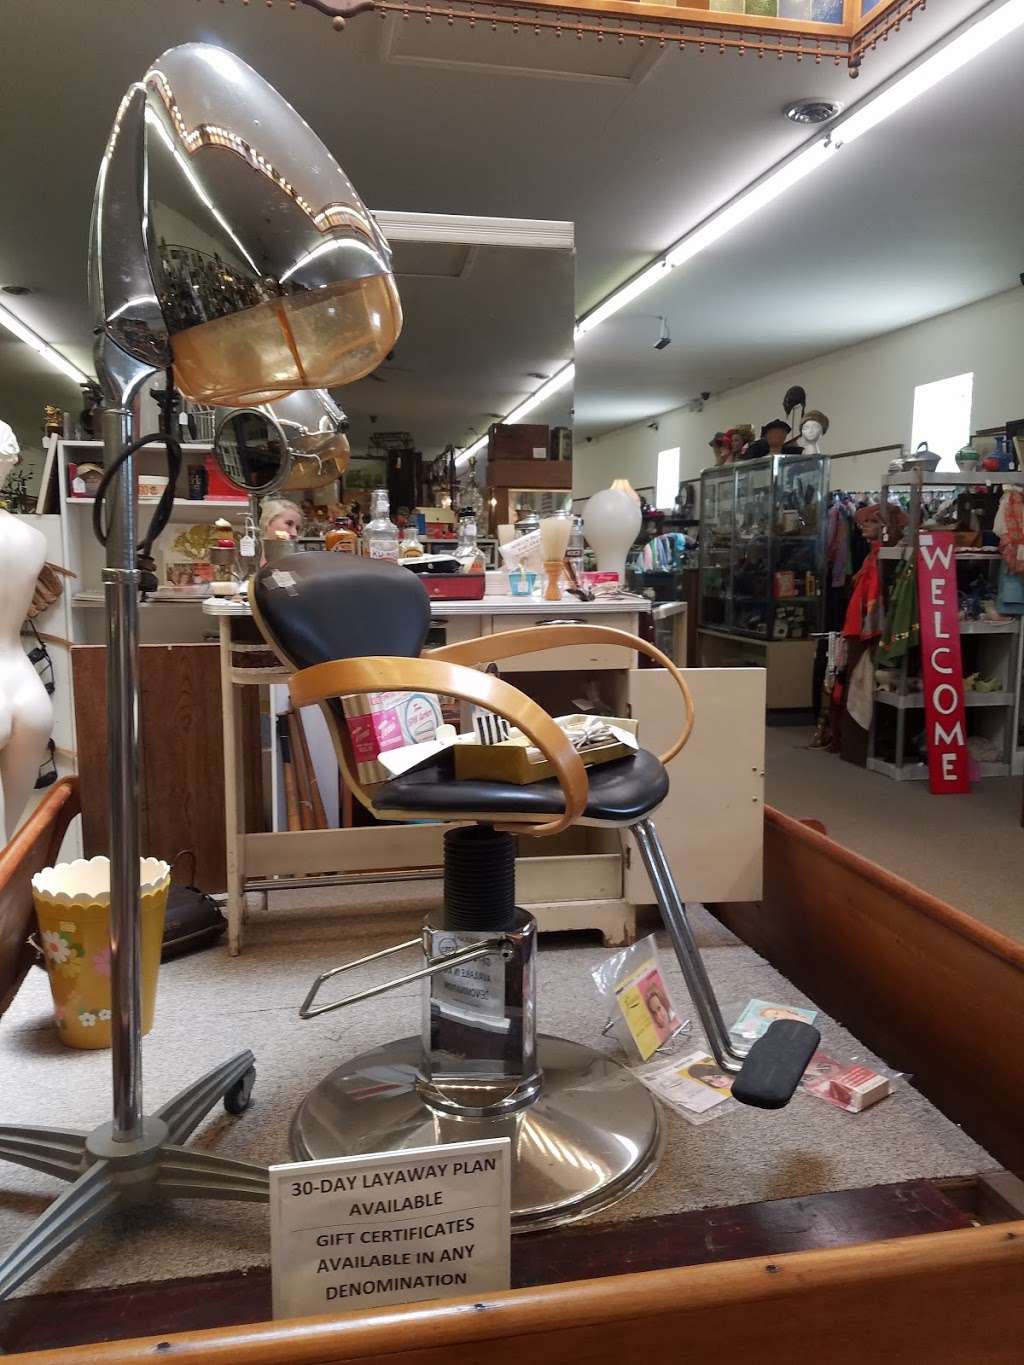 The Antique Market | 3707 N. E, Frontage Rd, Michigan City, IN 46360 | Phone: (219) 879-4084